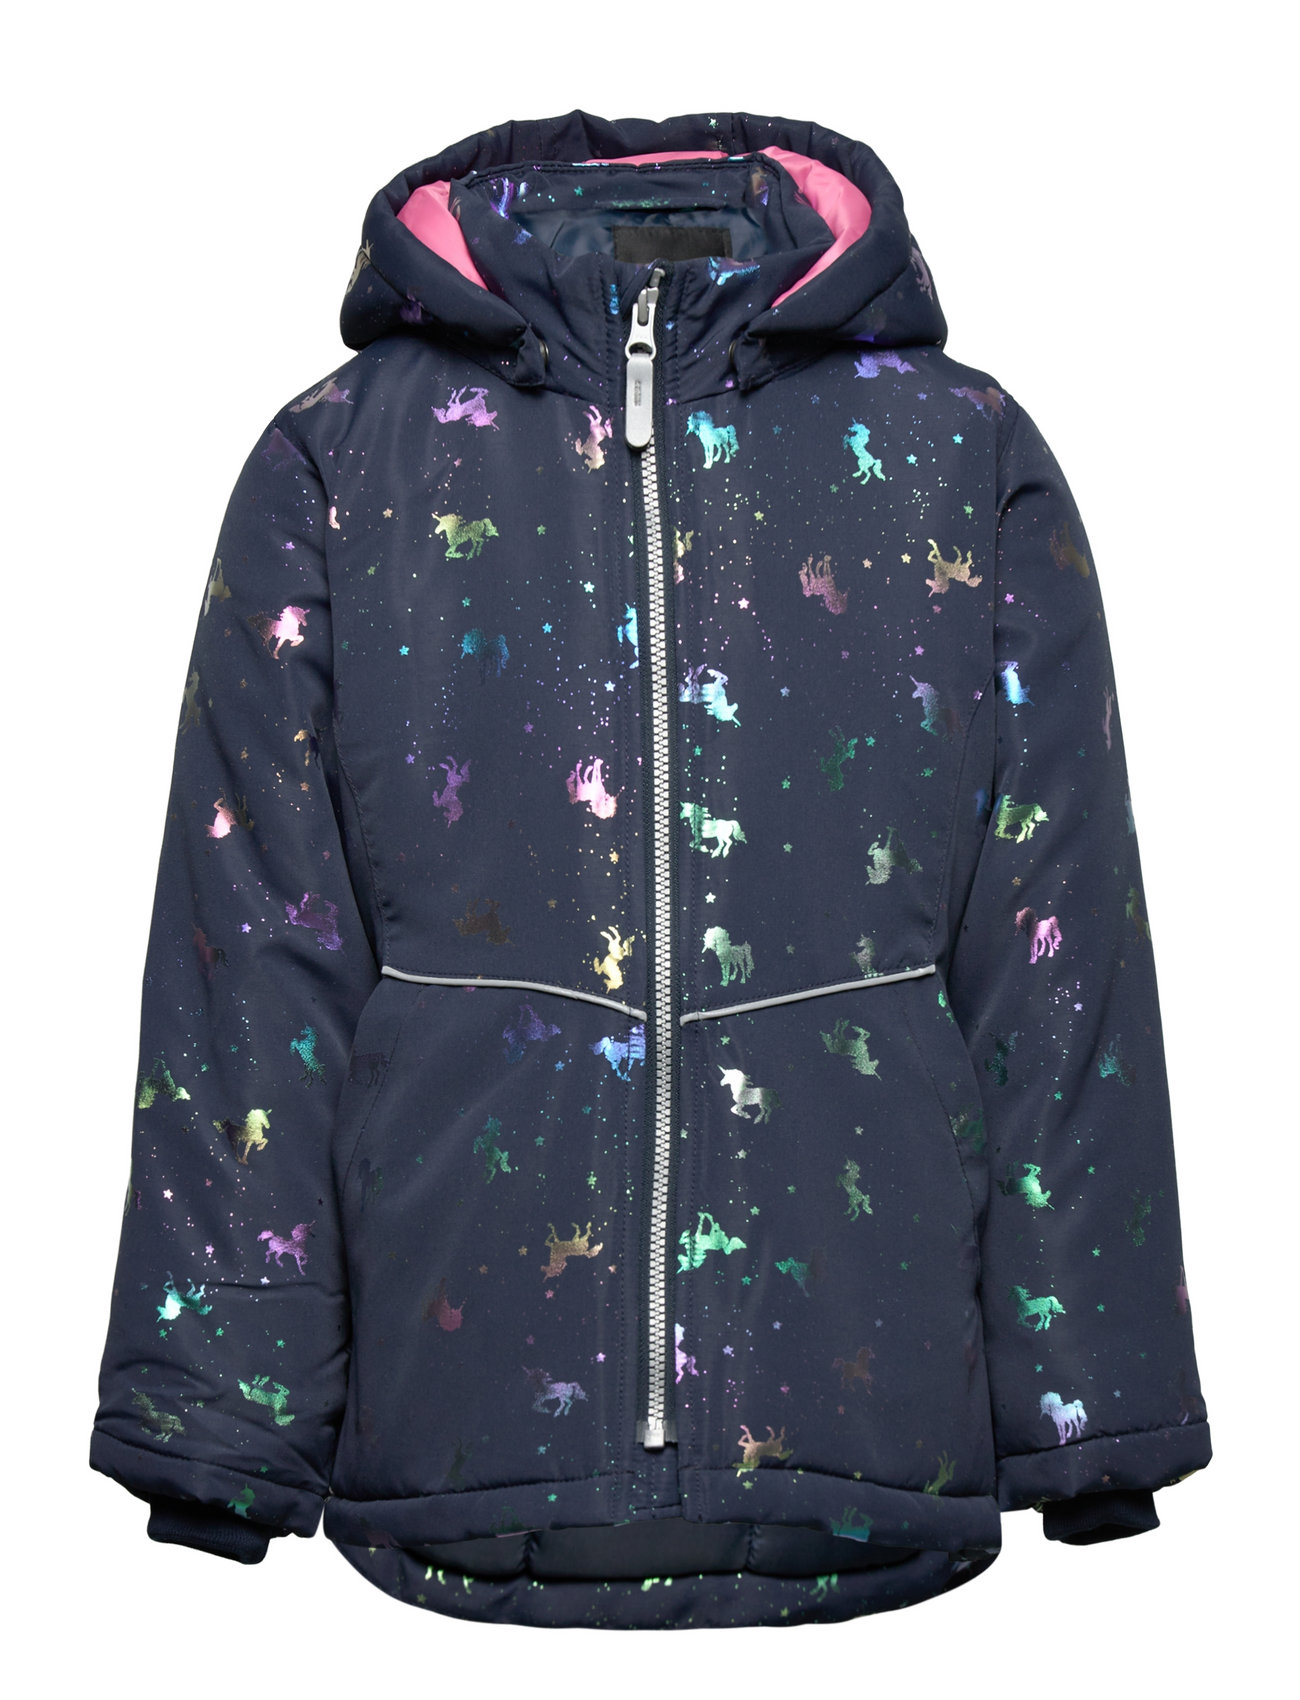 name it Nmfmaxi Jacket Noos 23.99 Boozt.com. online Foil and from Aop - at name easy Buy Fast it delivery Parkas €. returns